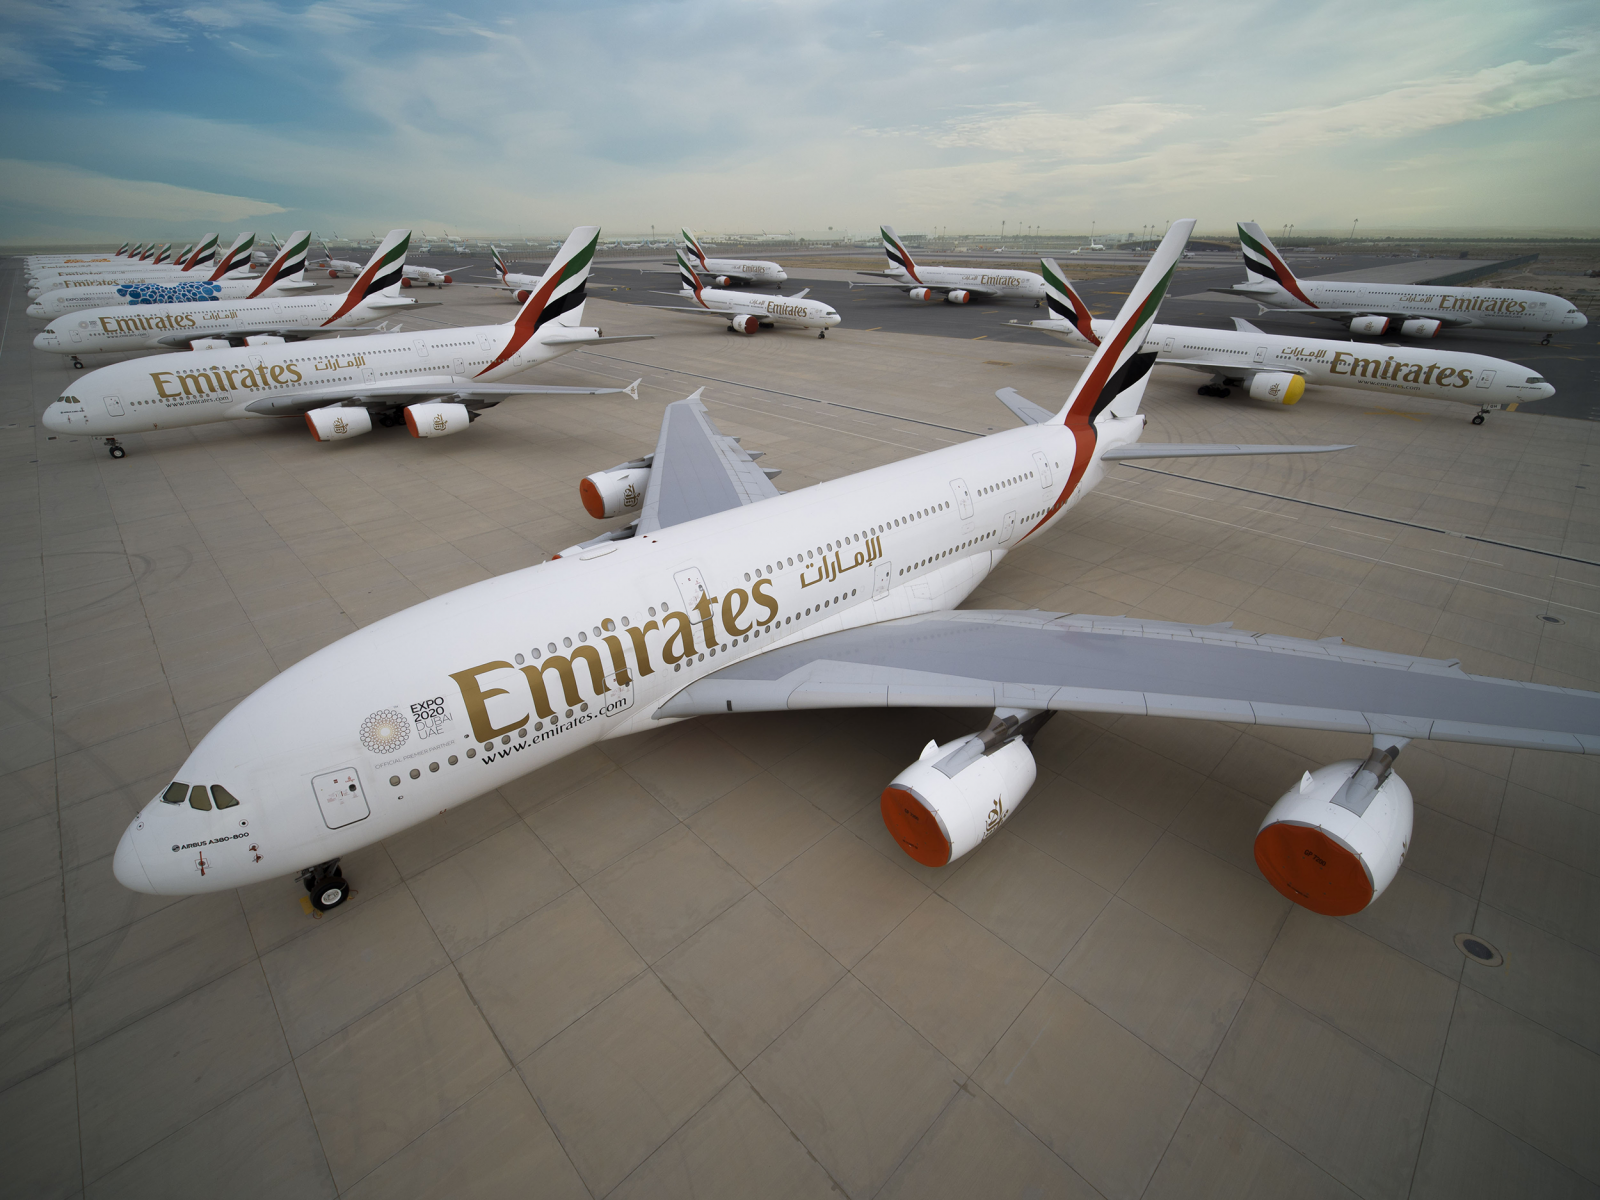 Who owns the most A380?